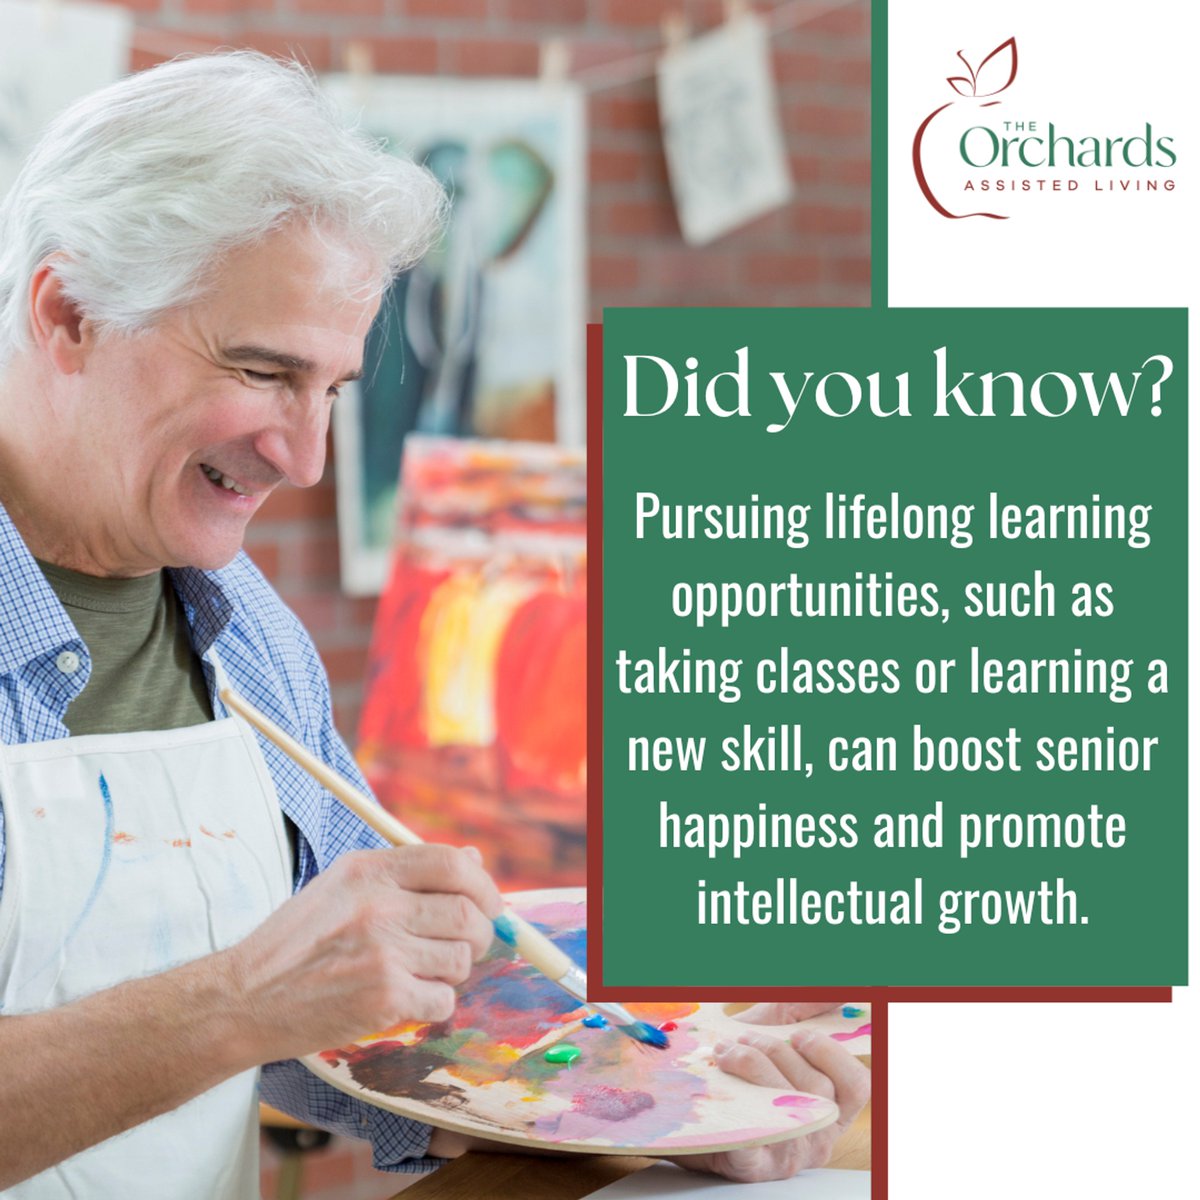 At The Orchards, we believe that lifelong learning is a powerful catalyst for senior happiness and intellectual growth. It ignites a sense of purpose, fuels personal growth, and strengthens connections with like-minded individuals.

#LifelongLearning #IntellectualGrowth